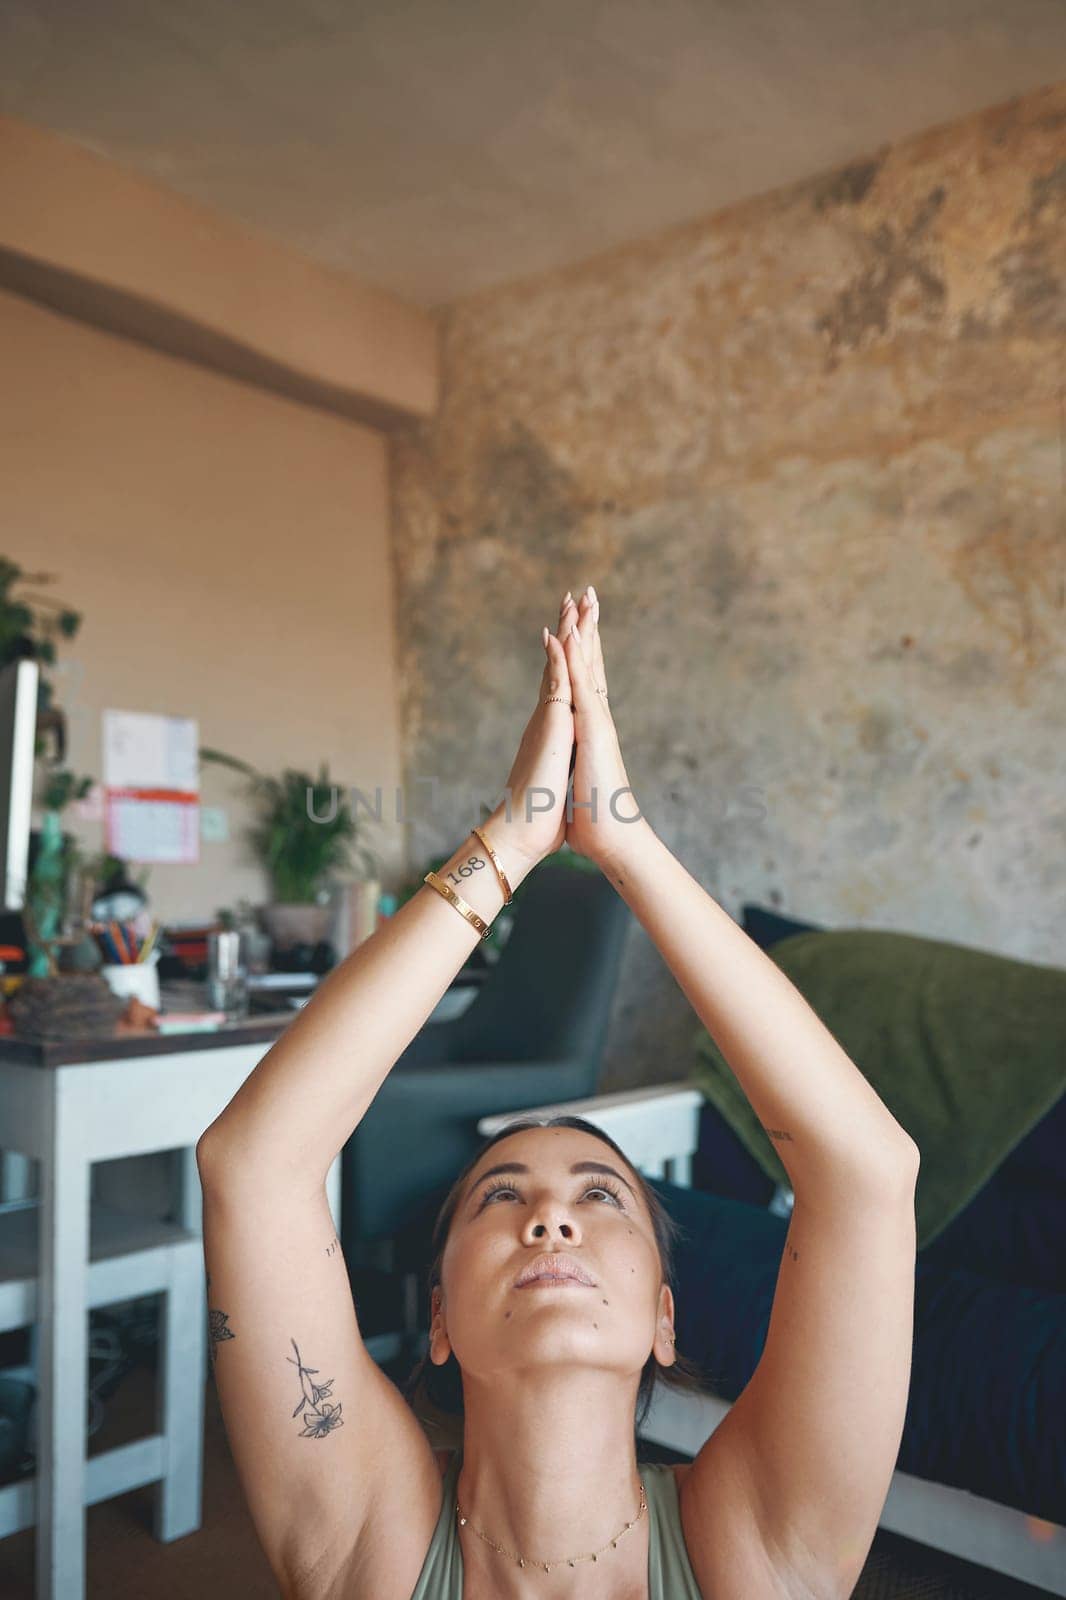 Yoga is a transformative way of life. a young woman meditating while practising yoga at home